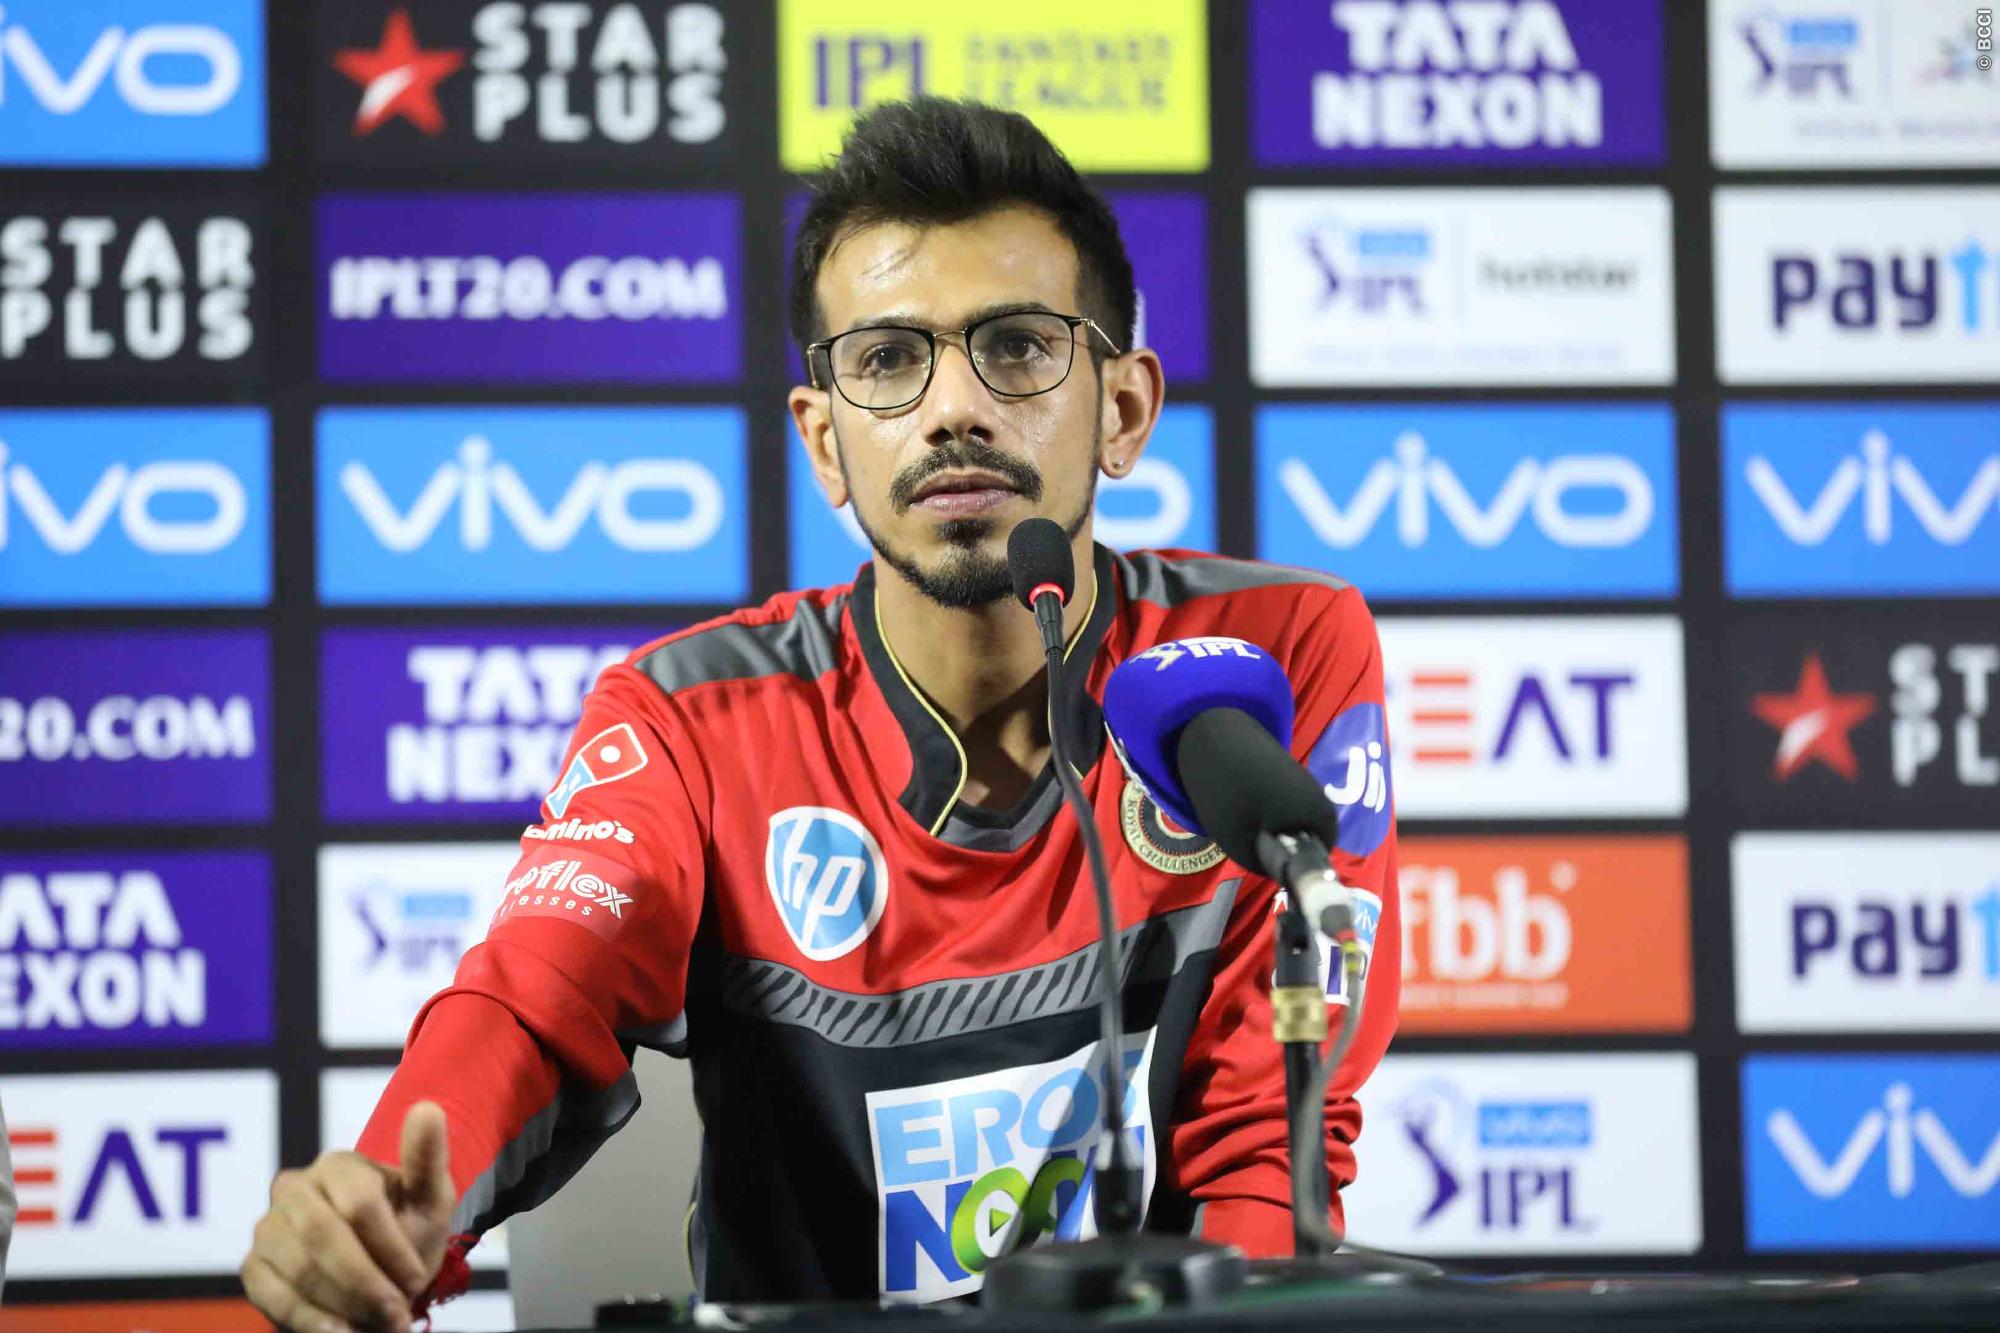 IND vs BAN | Bangladesh outplayed us in Delhi but India ready to bounce back, asserts Yuzvendra Chahal